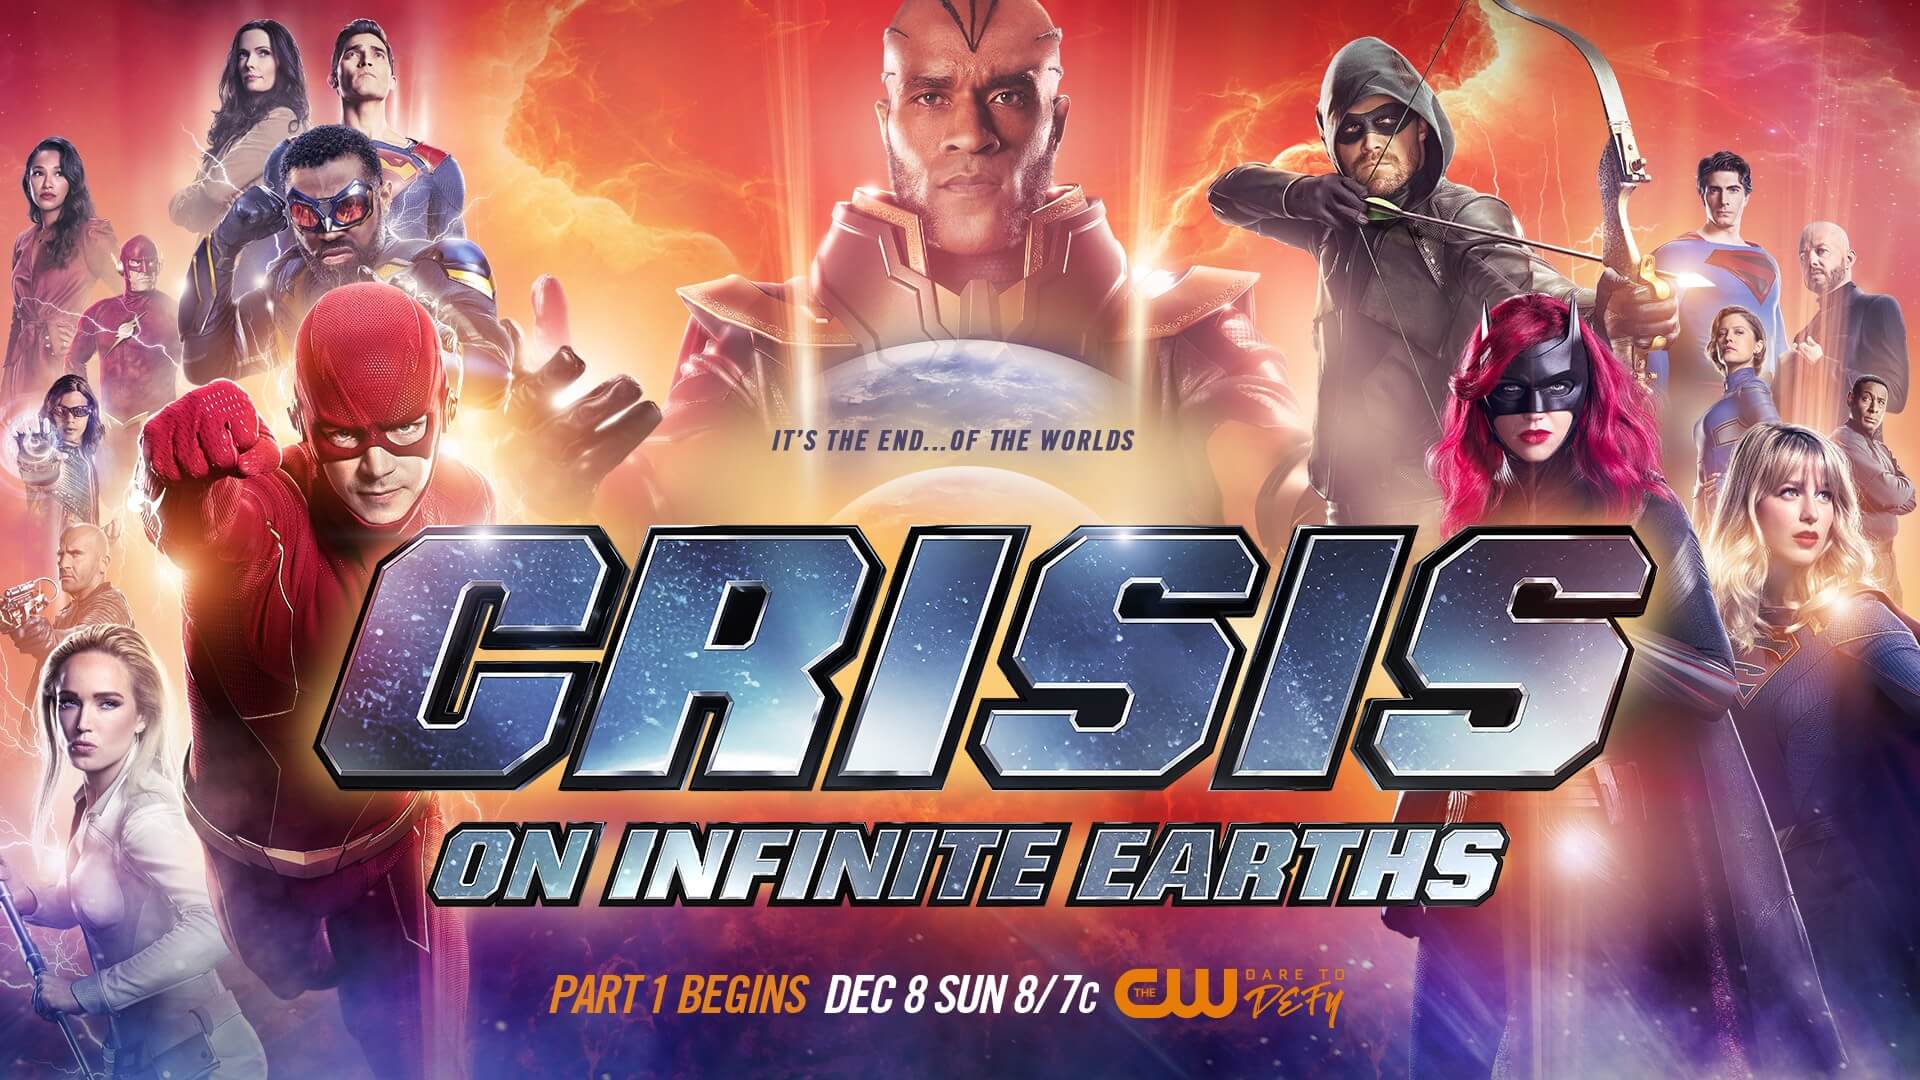 REVIEW: "Crisis on Infinite Earths" CW Crossover Event, Parts 1-3...